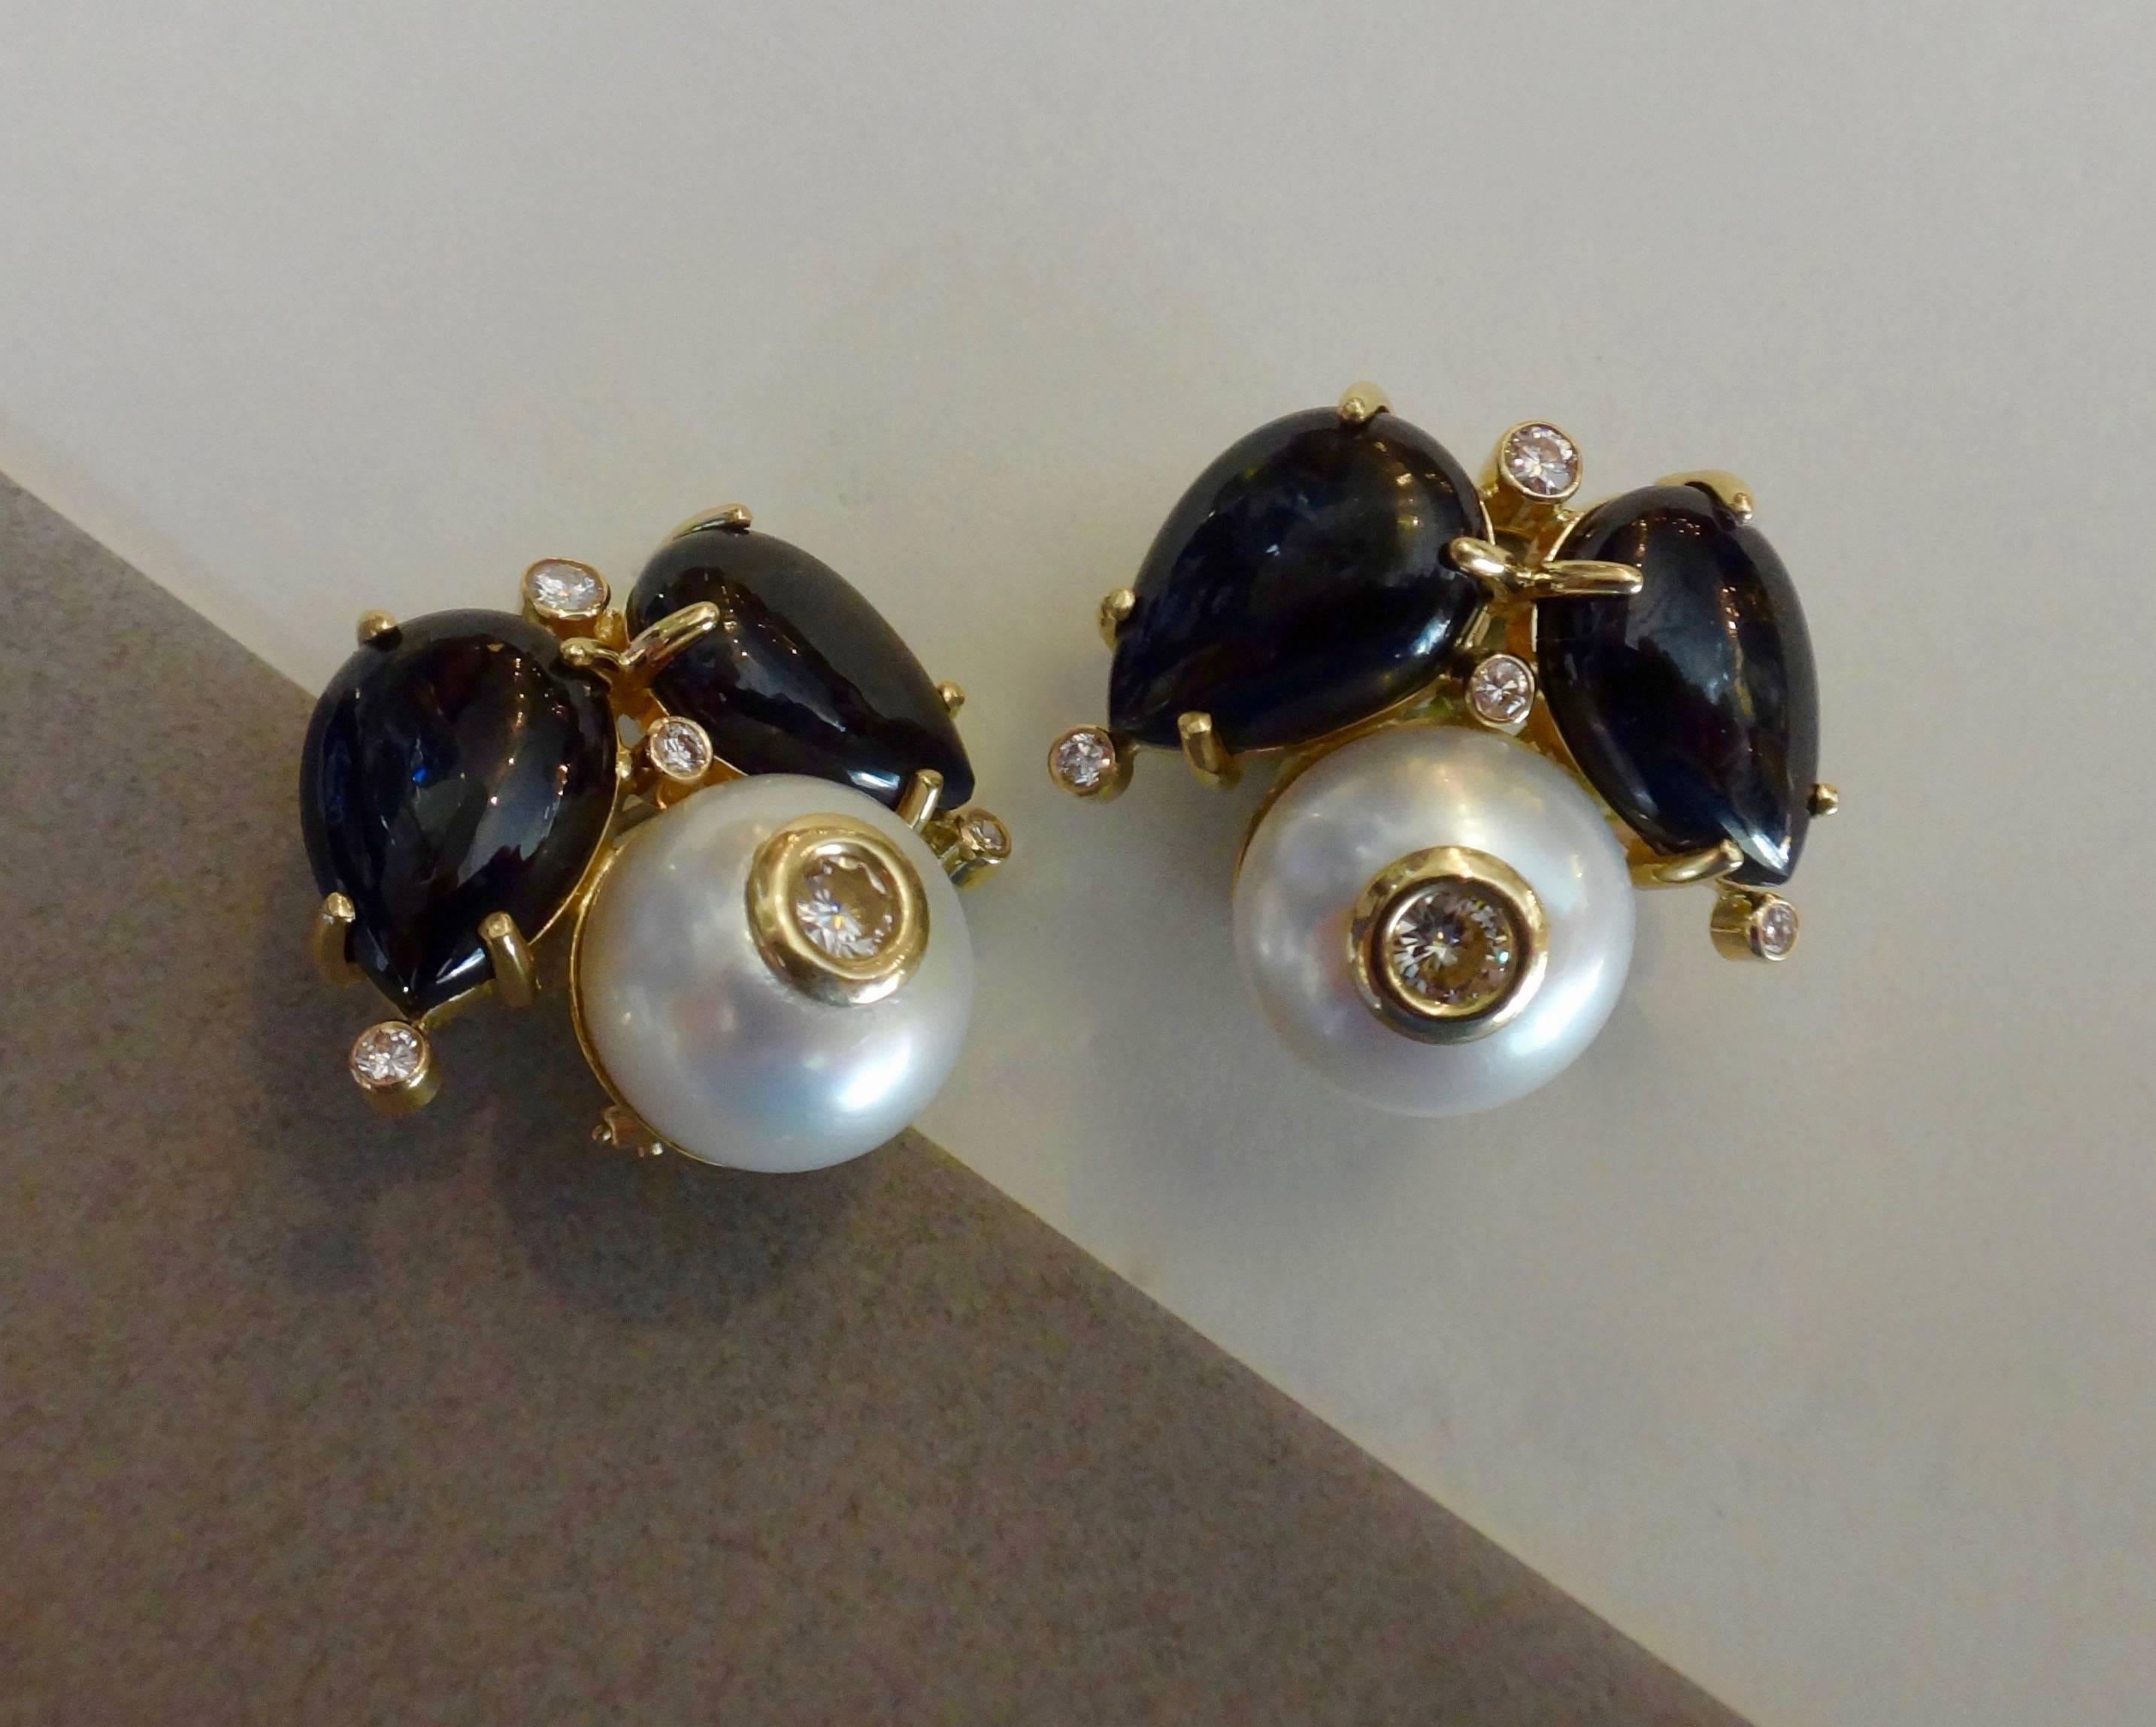 Luxurious, cabochon cut black spinels are combined with white button pearls studded with bezel set diamonds along with other diamond accents in these bespoke button earrings. They are a generous size without being ostentatious.  Posts with omega